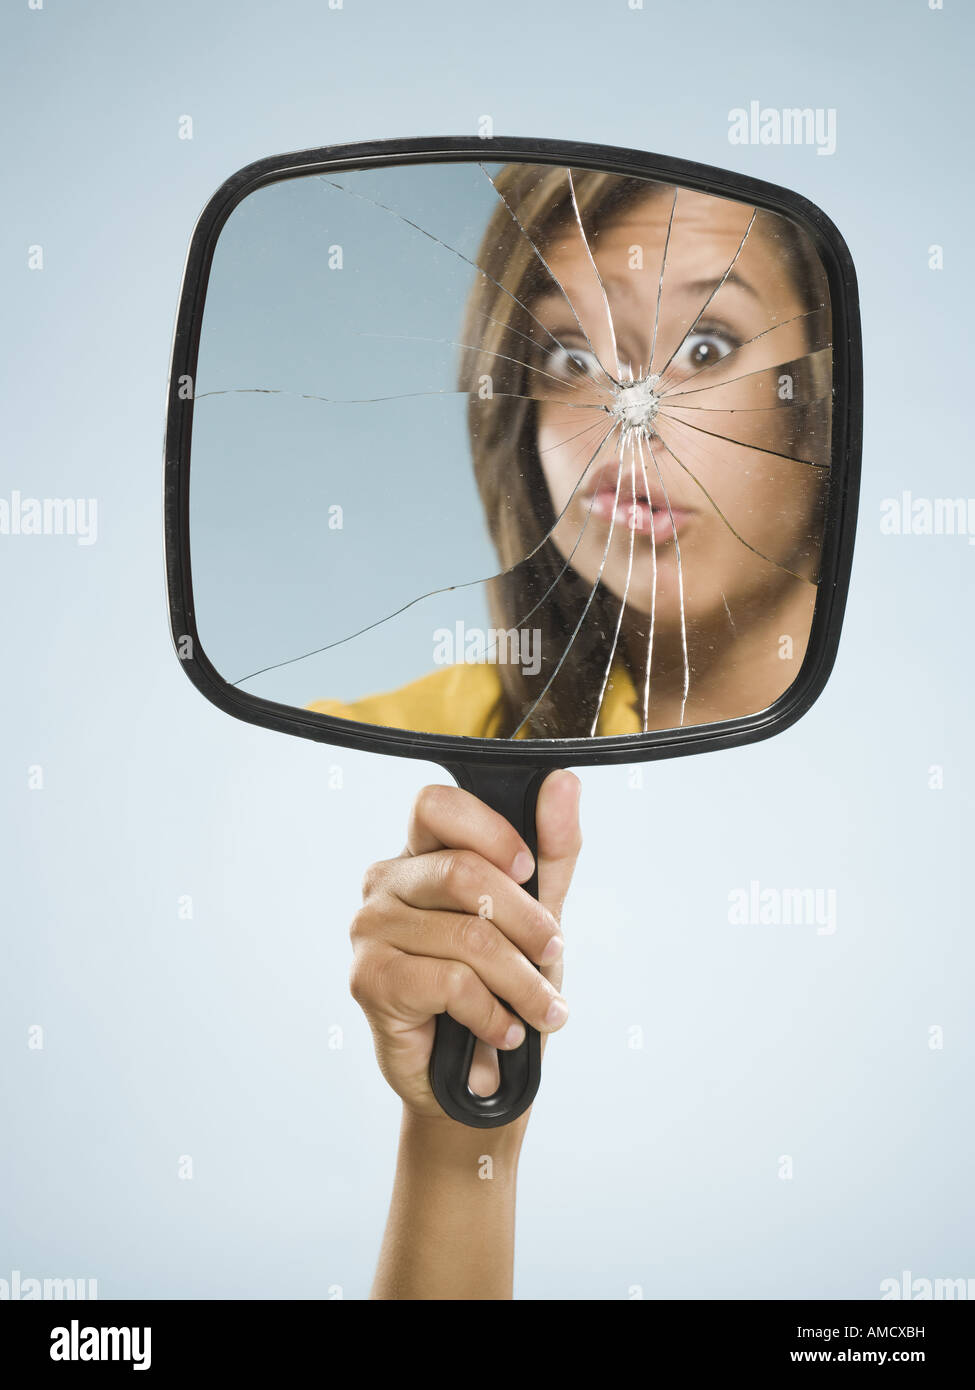 Reflection of woman in broken mirror Stock Photo